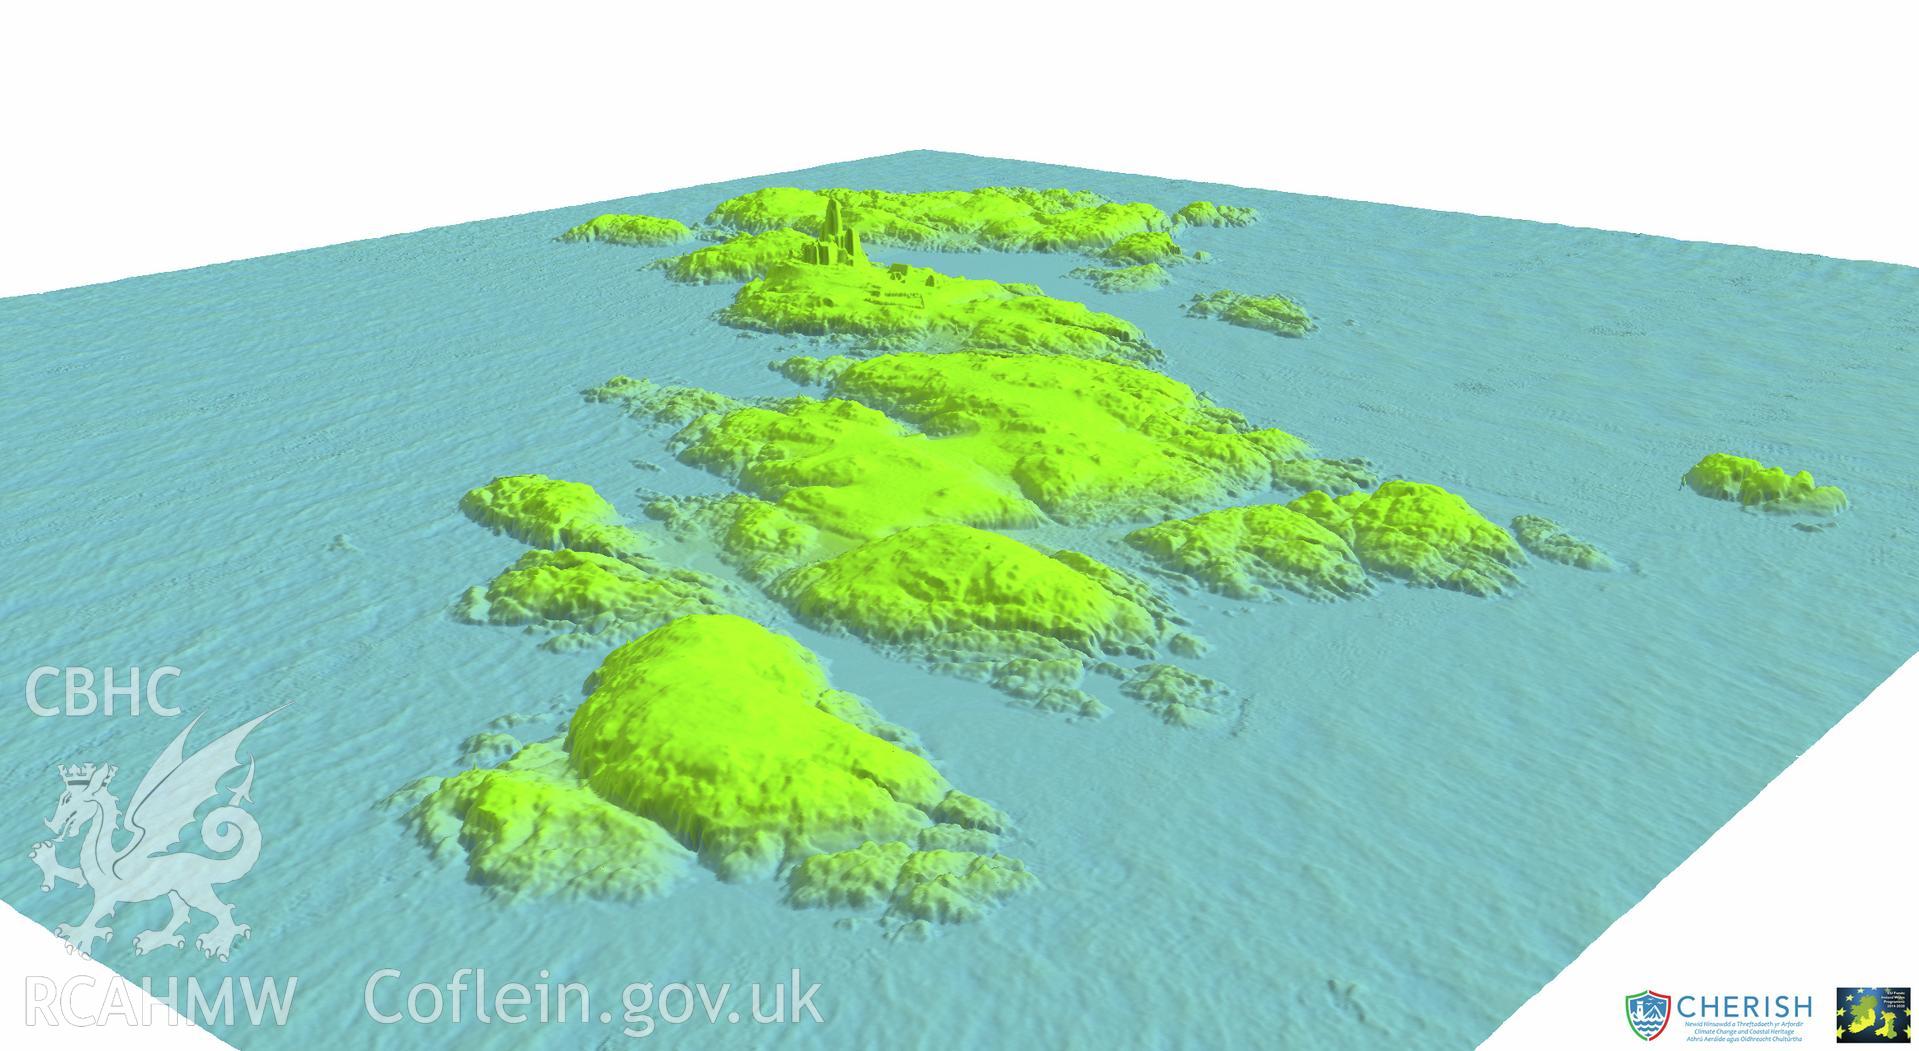 Ynysoedd y Moelrhoniaid (The Skerries islet). Airborne laser scanning (LiDAR) commissioned by the CHERISH Project 2017-2021, flown by Bluesky International LTD at low tide on 24th February 2017. View showing The Skerries Islet and its lighthouse from the